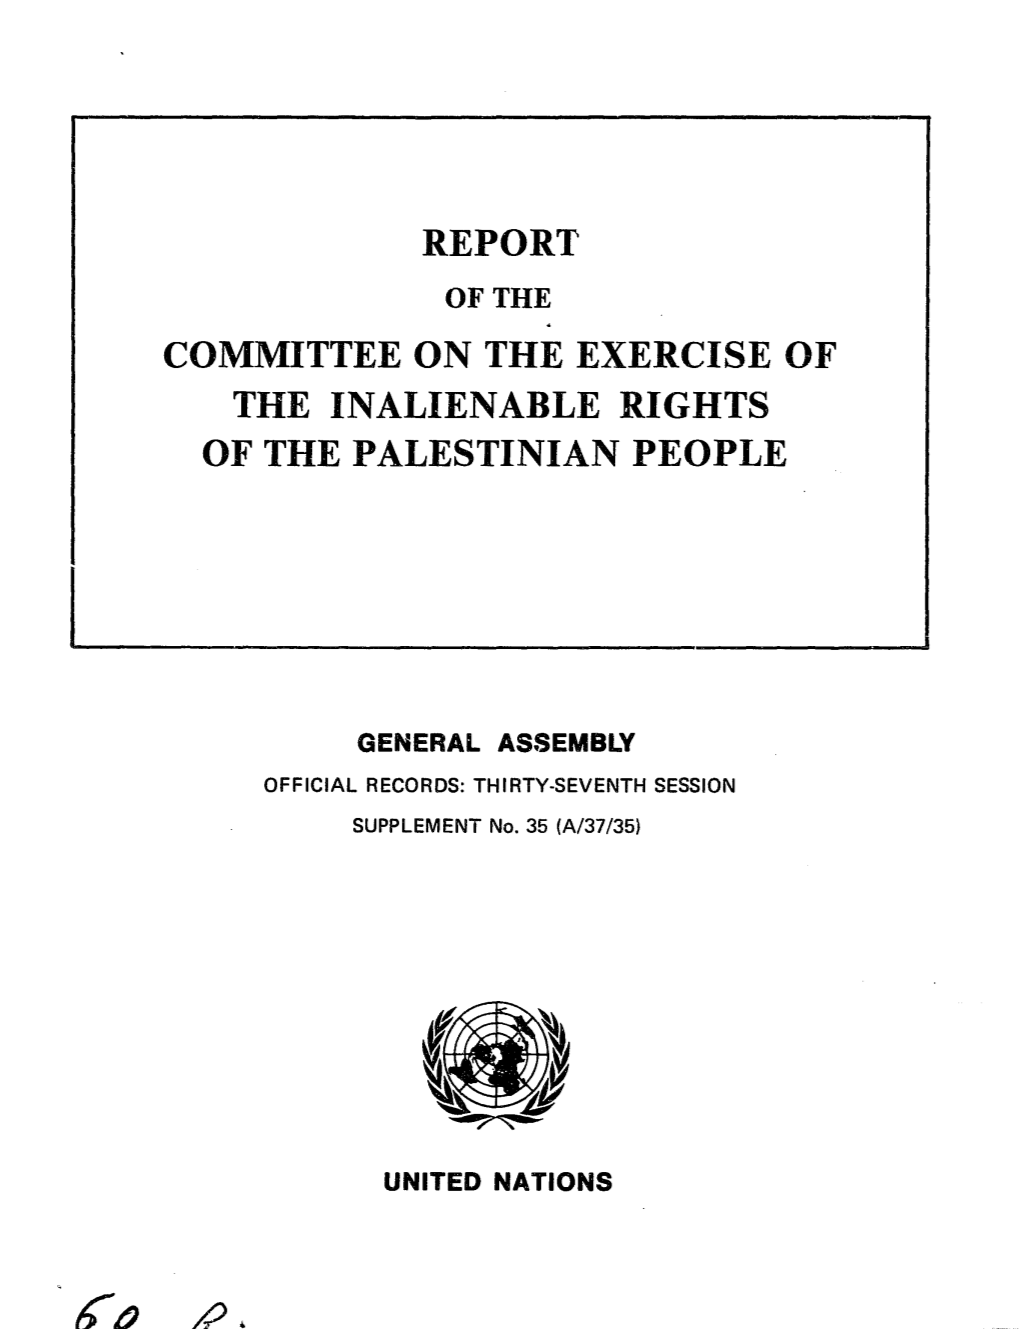 Report Committee on the Exercise of the Inalienable